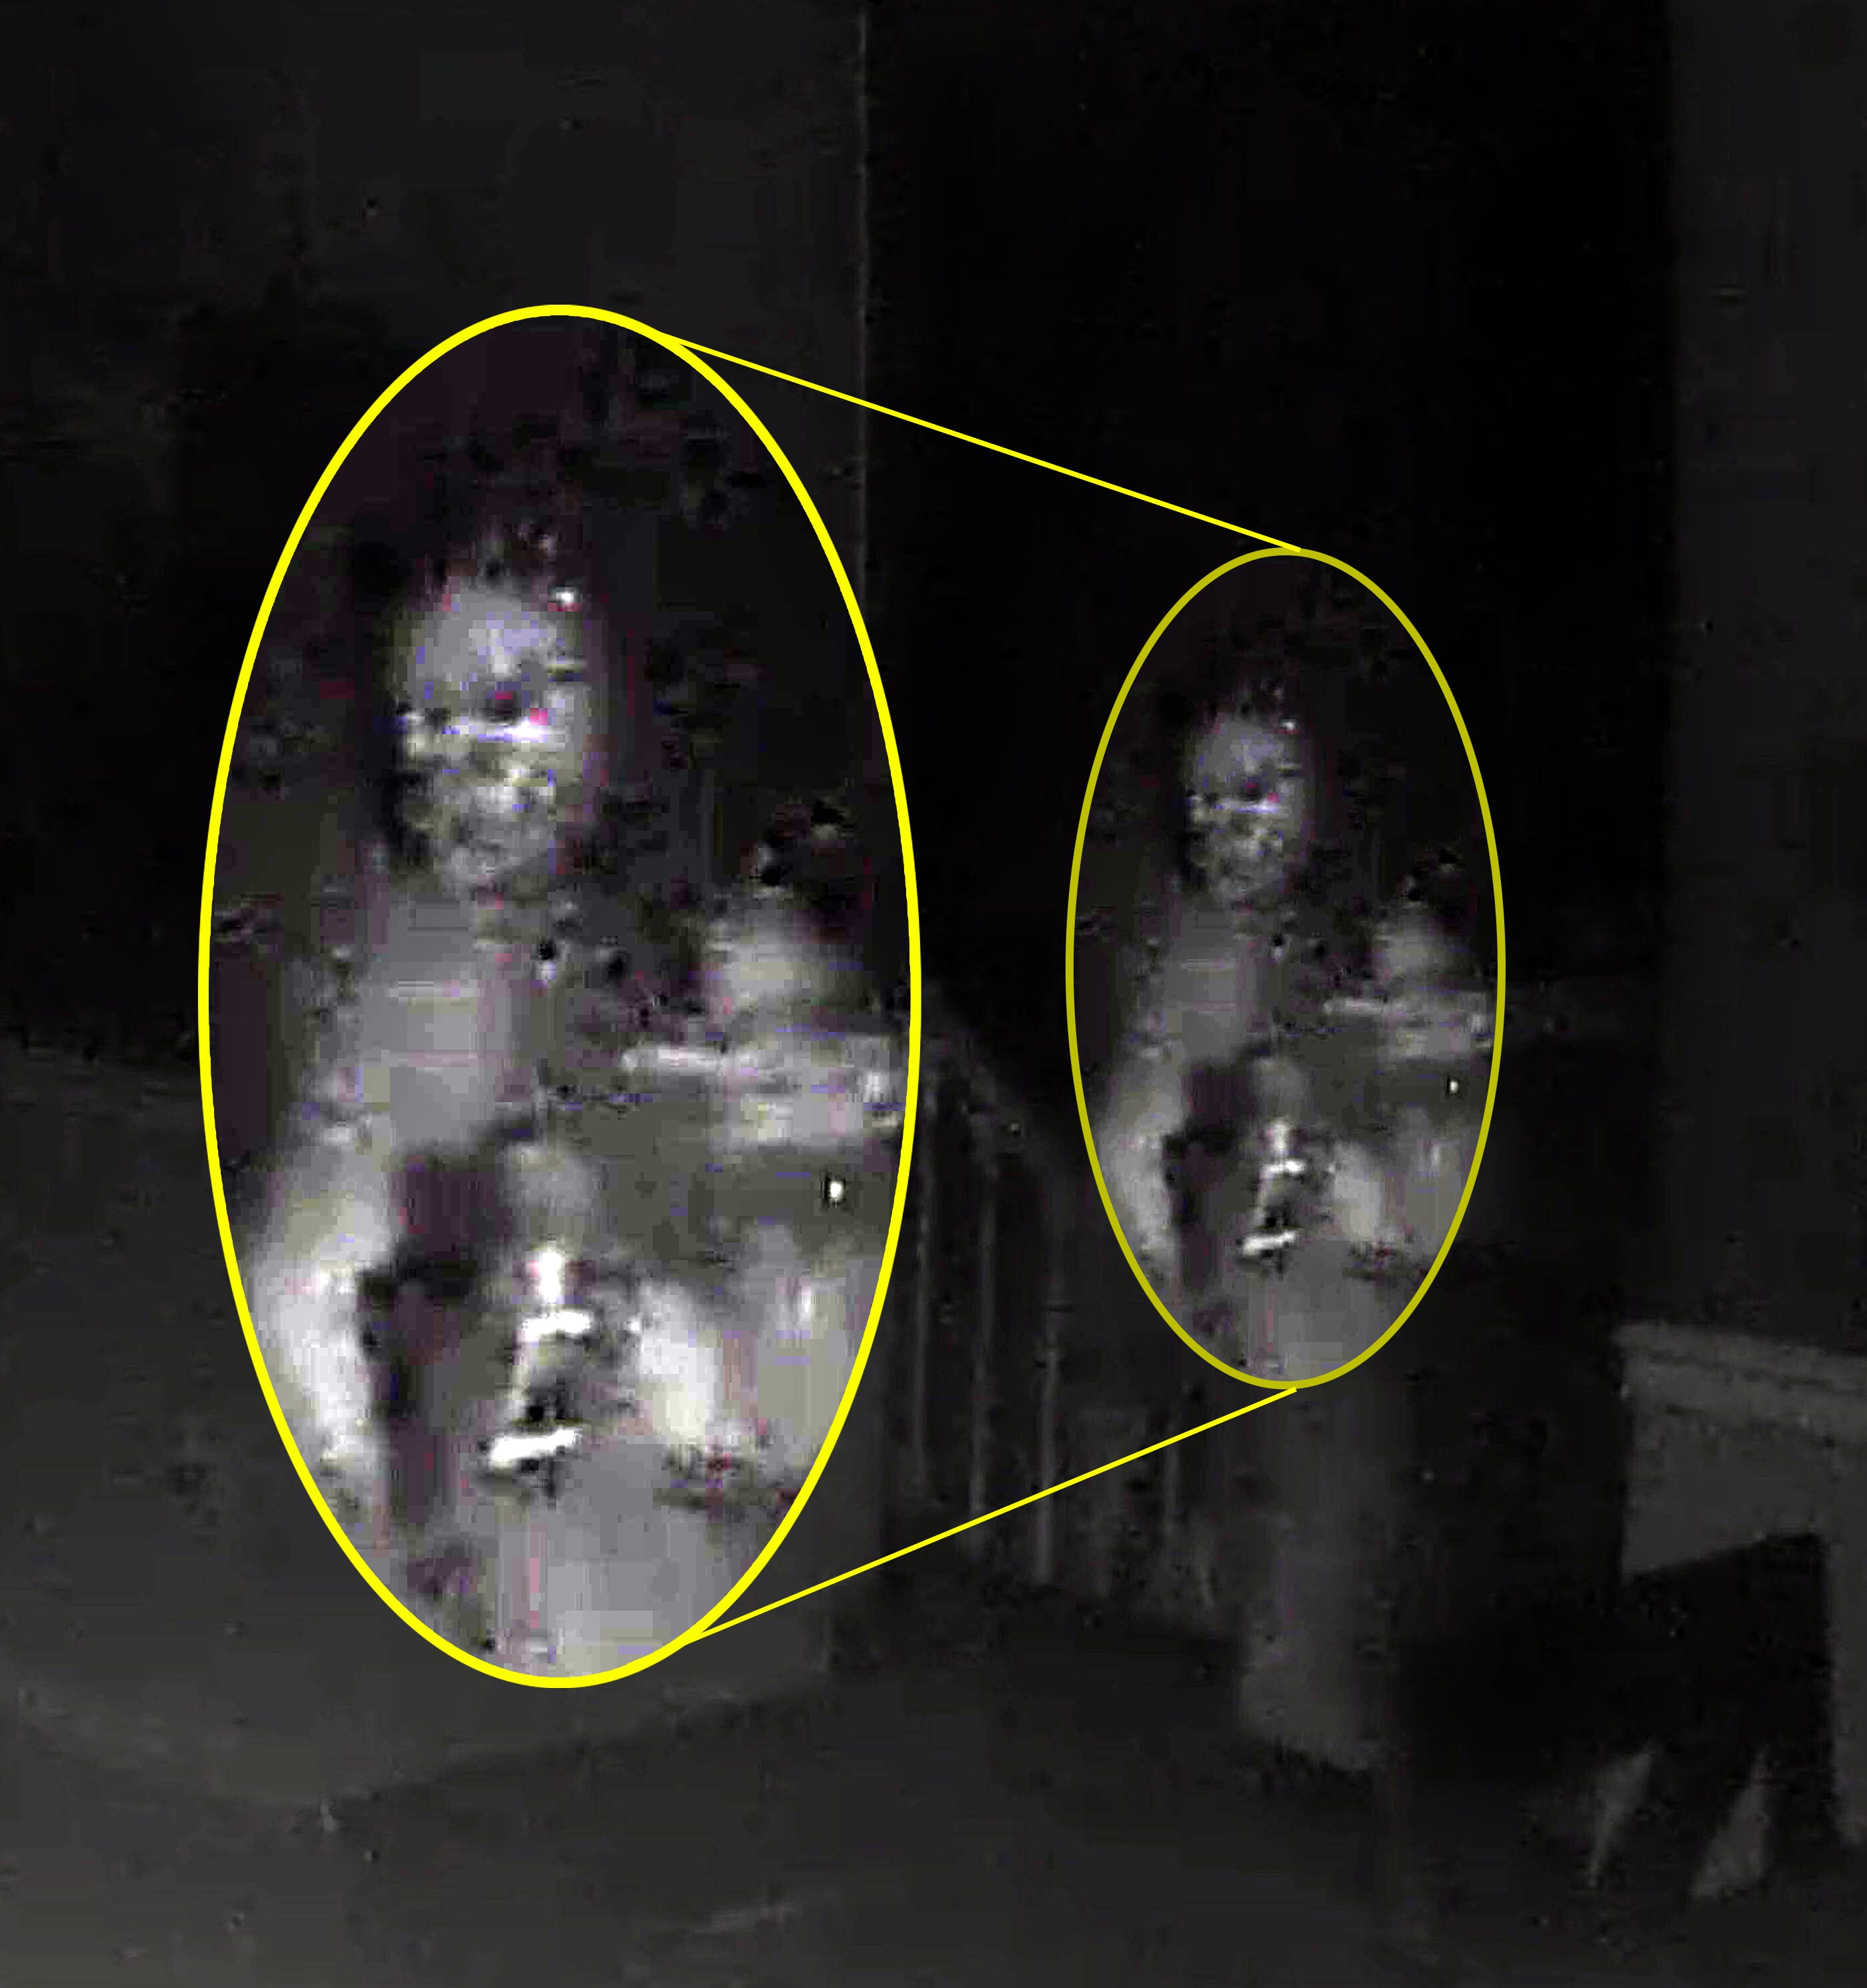 SEE THE PIC: Pennsylvania mom 'too scared to sleep' after seeing ghostly figure on security camera